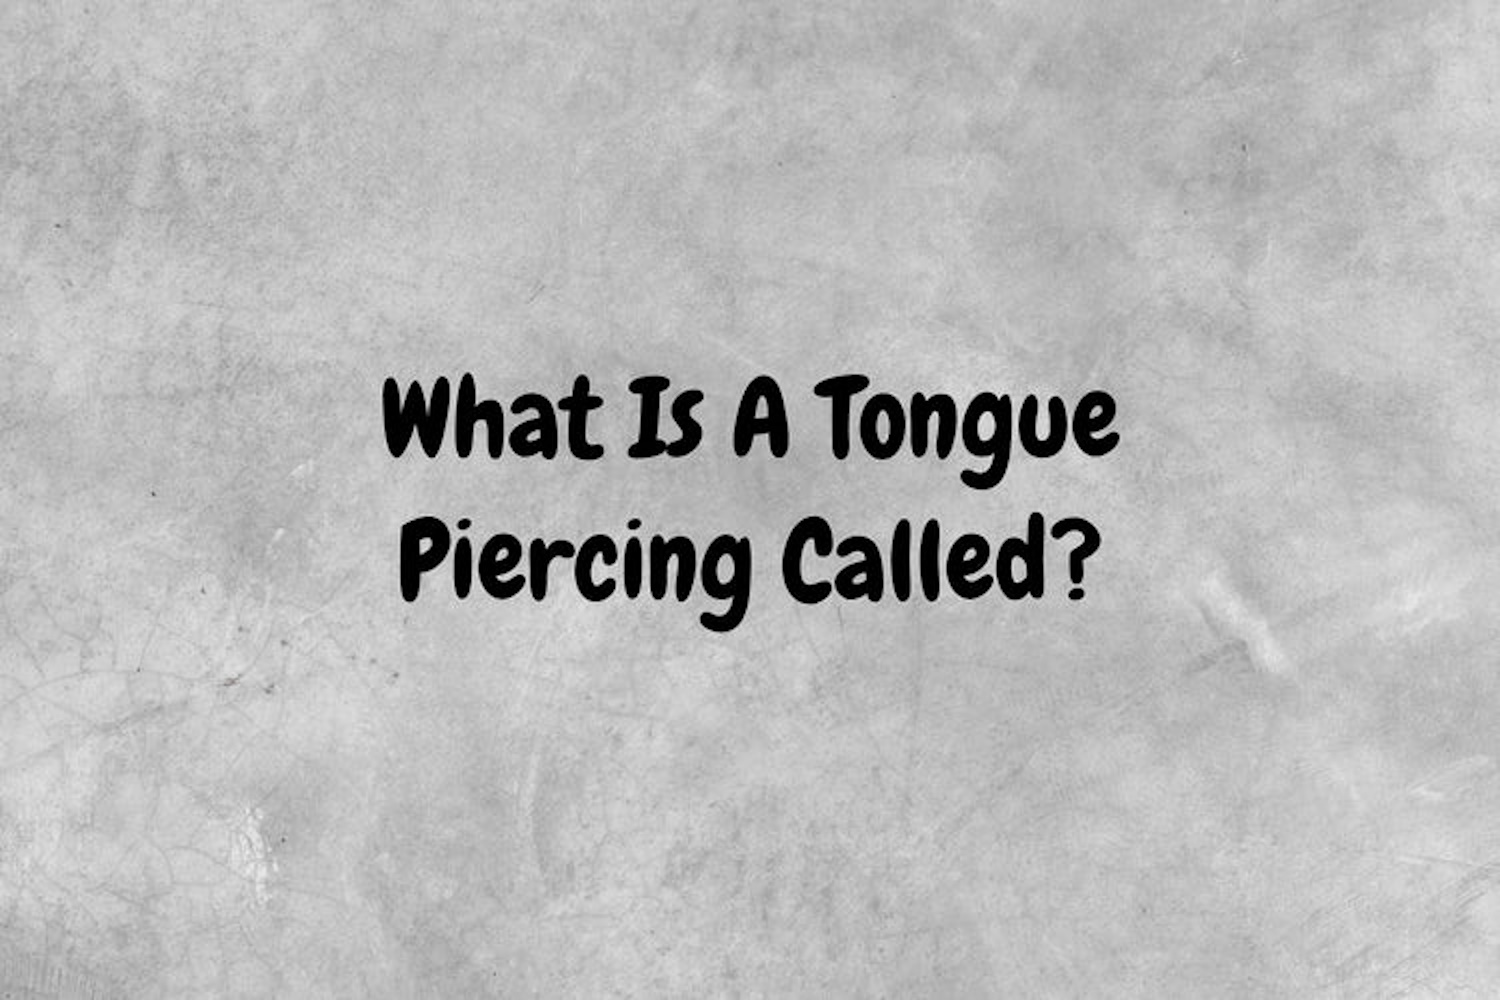 An image with a gray background that has black text spelling out, "What is a tongue piercing called?"